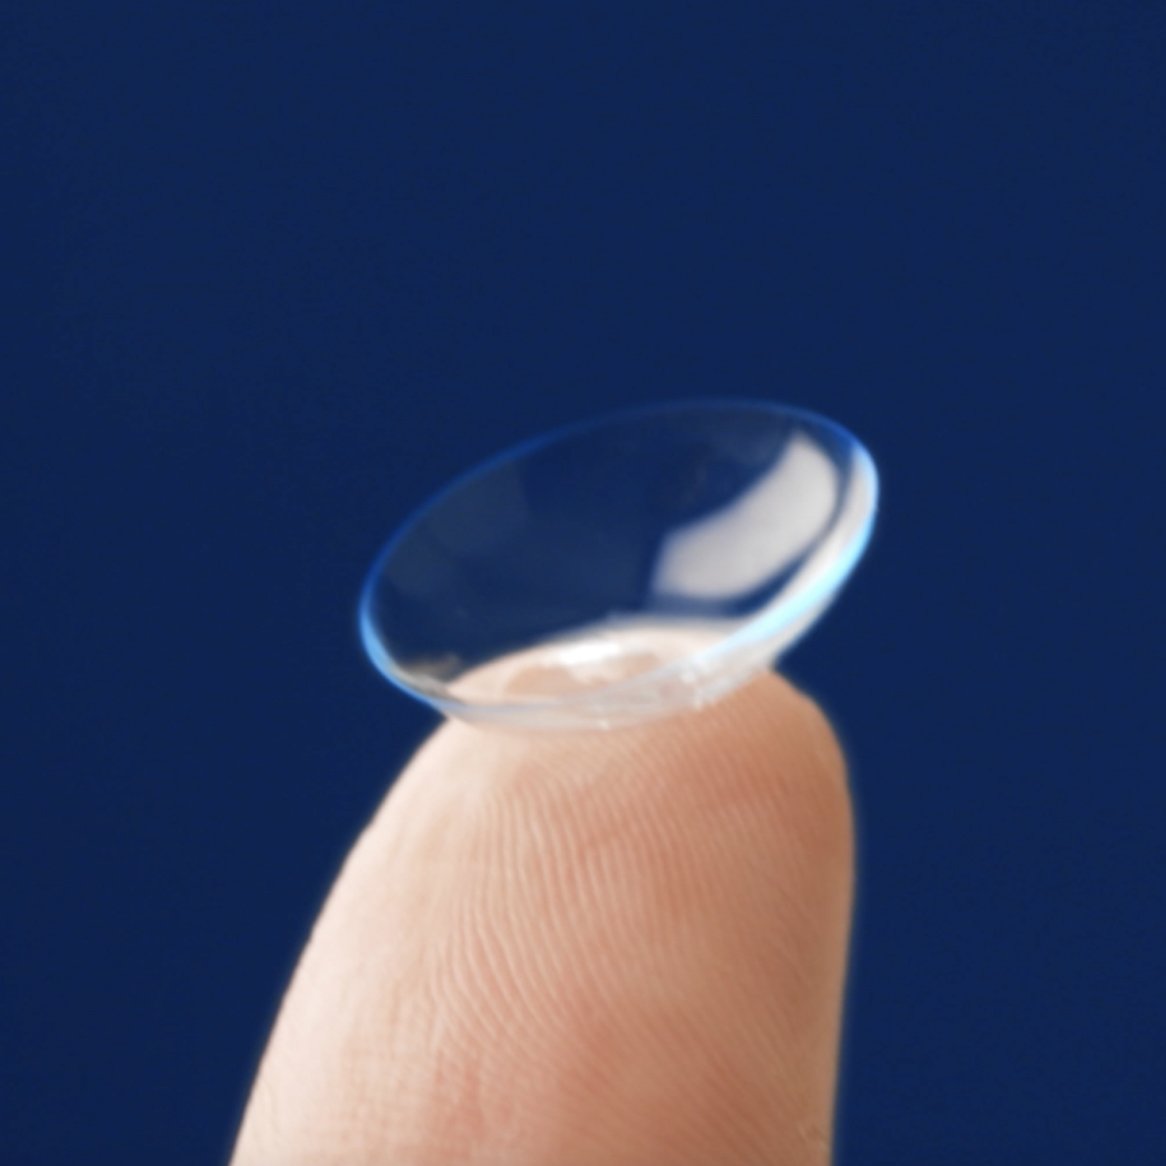 Close-up image of a contact lens on a person's fingertip